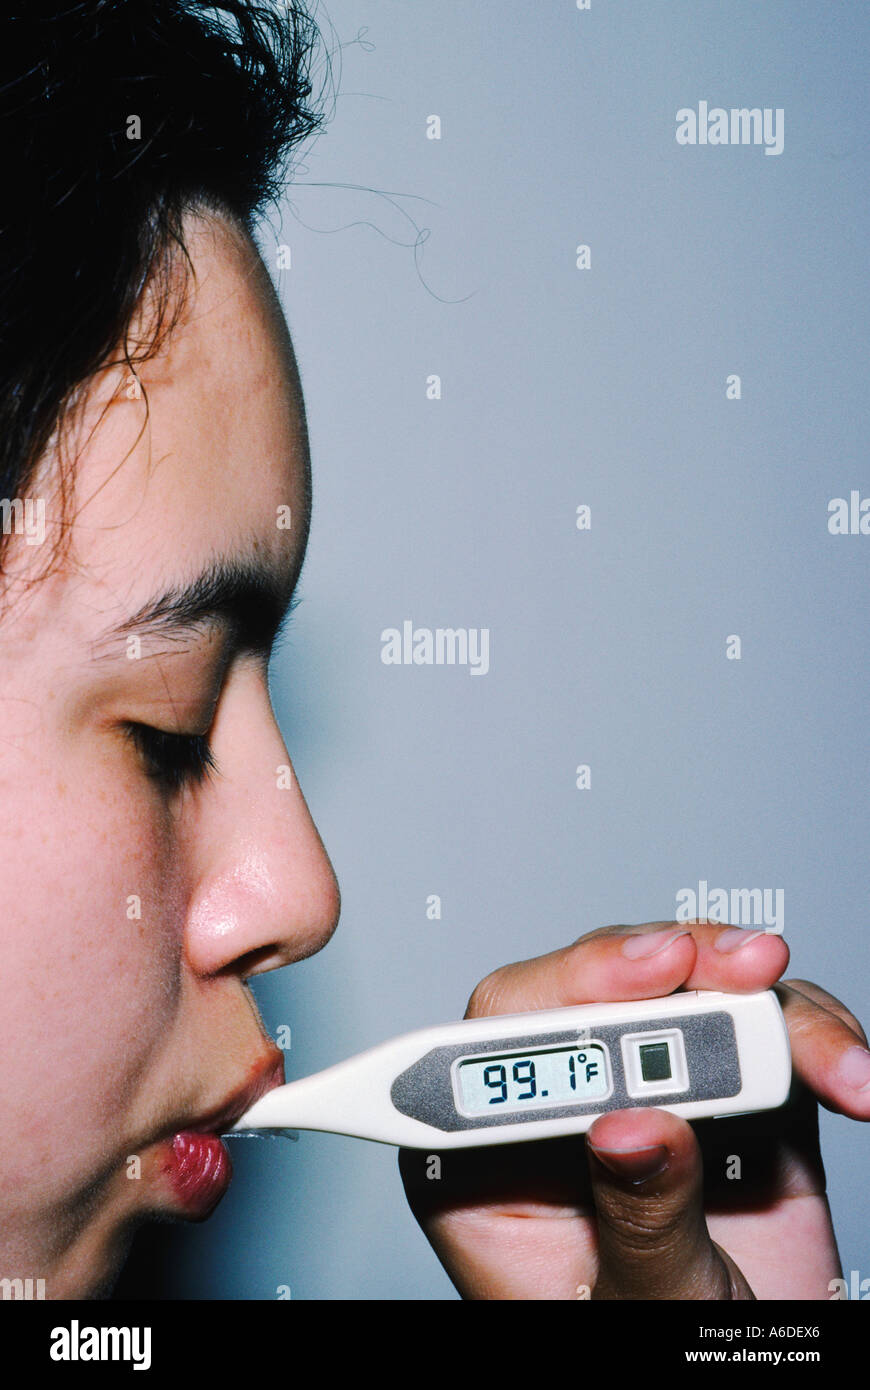 21656 Girl 13 years old, using a digital thermometer to take her temperature Stock Photo